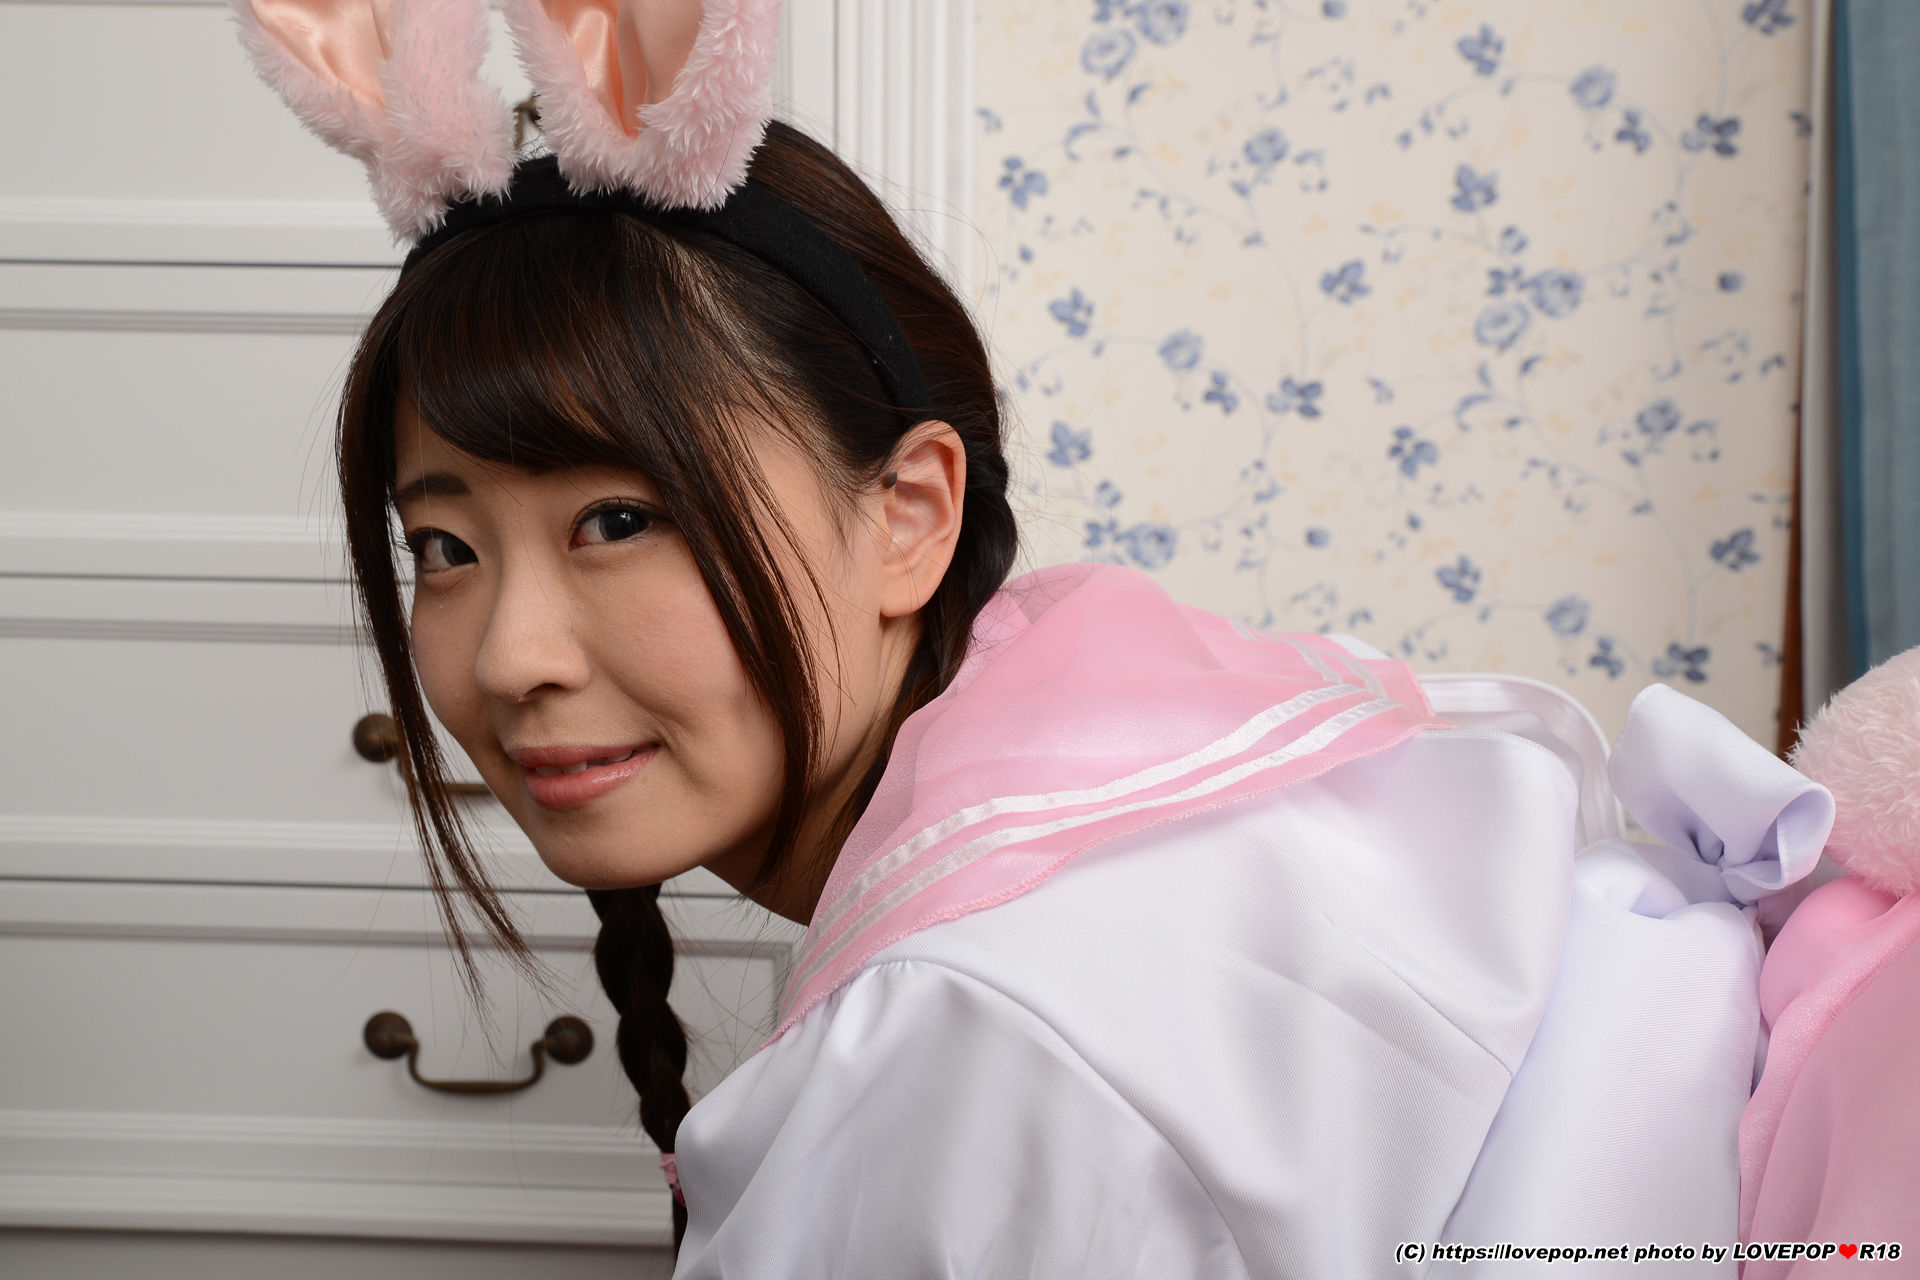 [LOVEPOP] Special Maid Collection - Airi Satou さとう愛理 Photoset 04